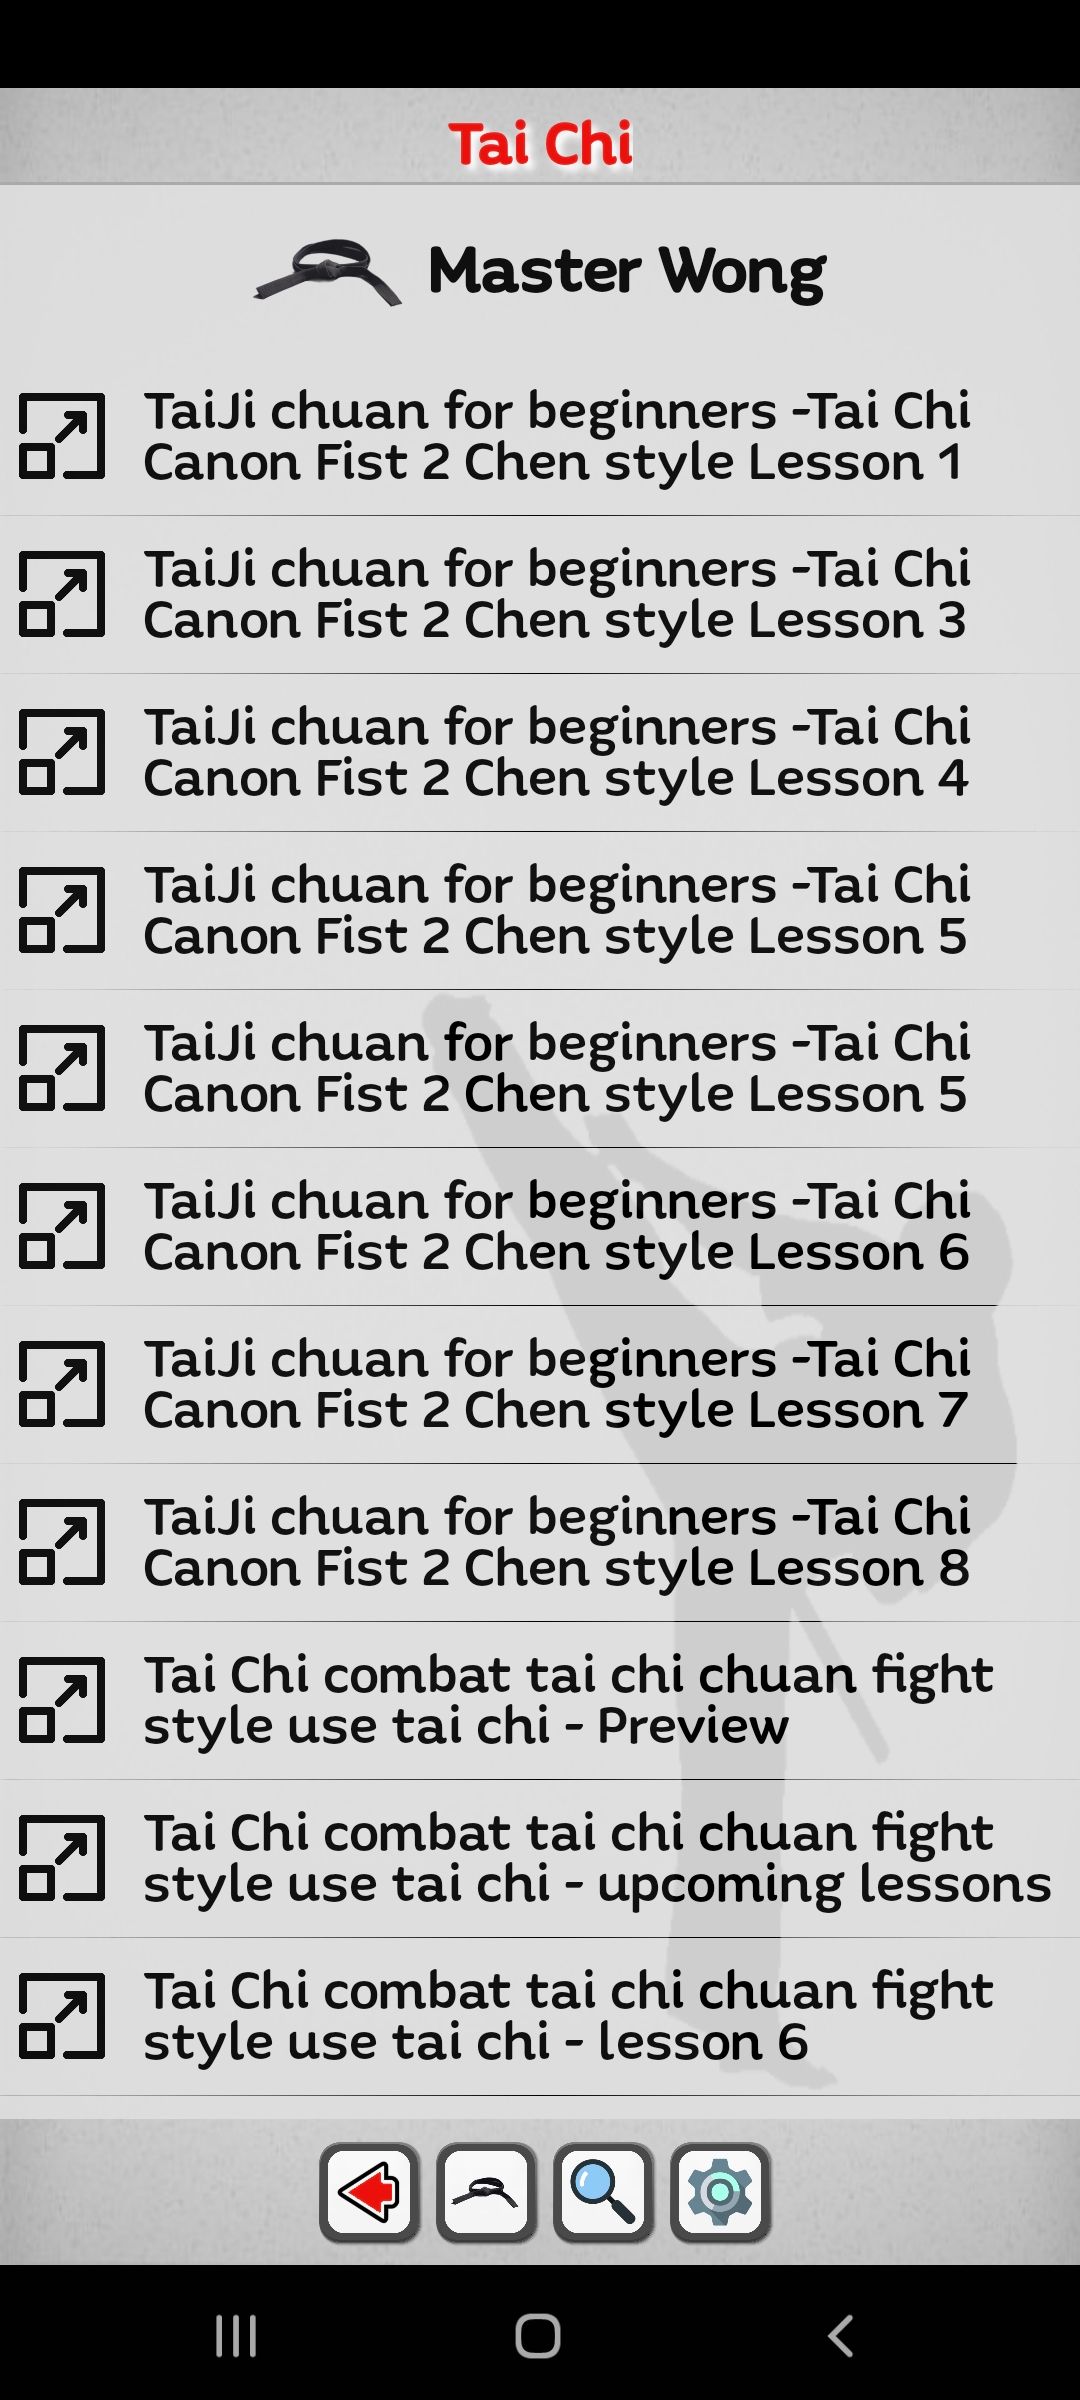 Martial Arts mobile app master wong tai chi lessons